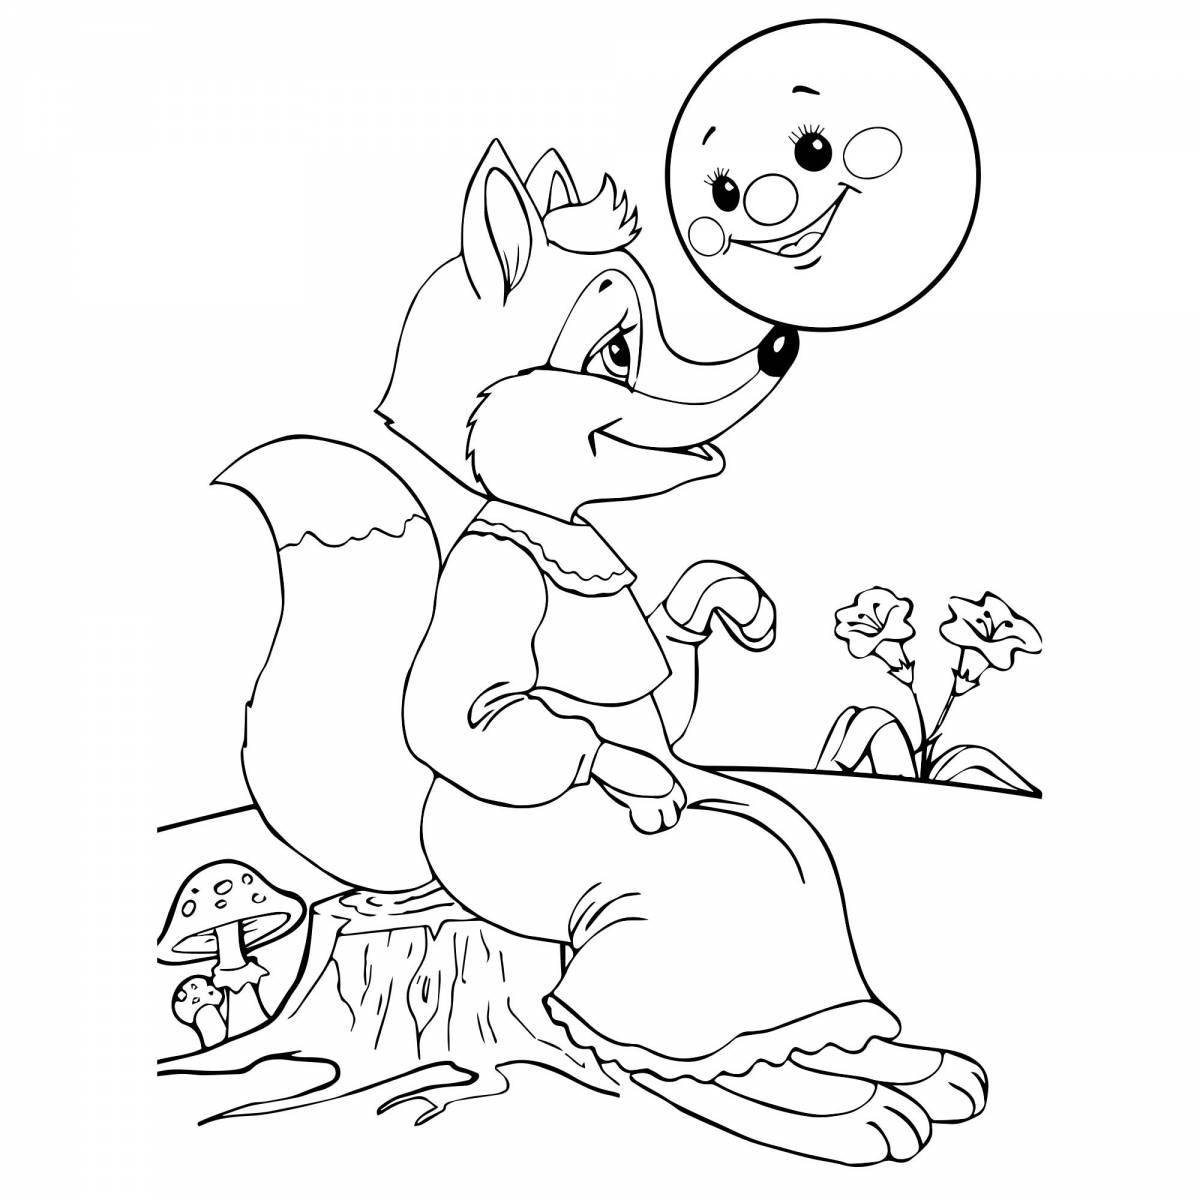 Cute fairy tale coloring pages